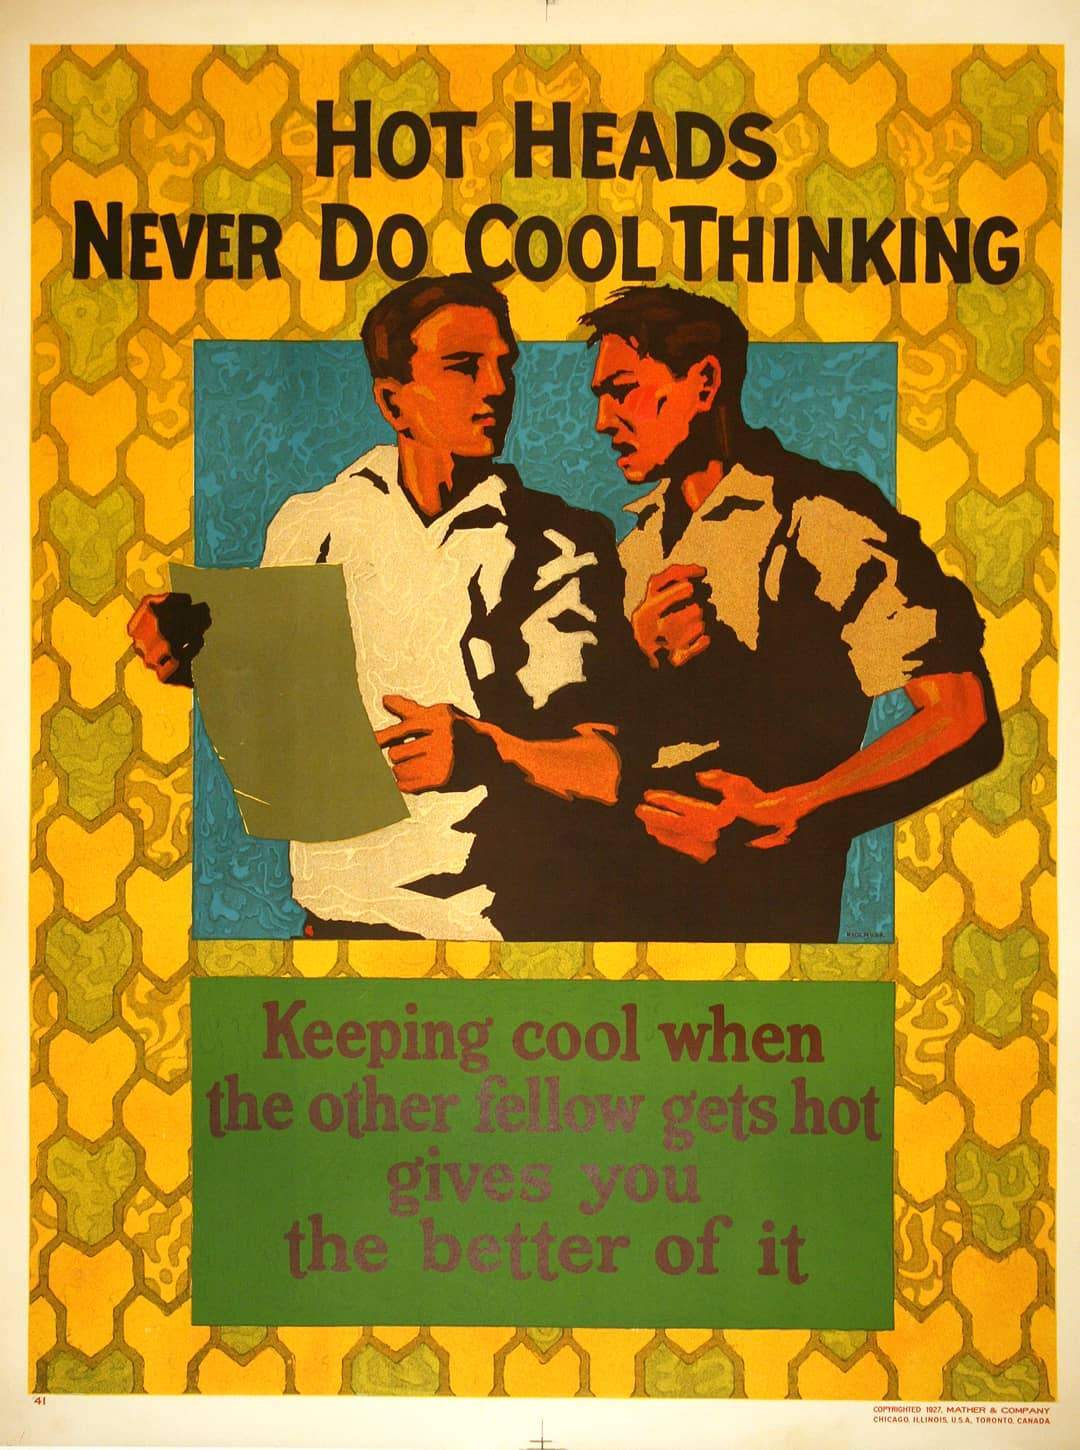 Original Mather Work Incentive Poster 1927 - Hot Heads Never Do Cool Thinking